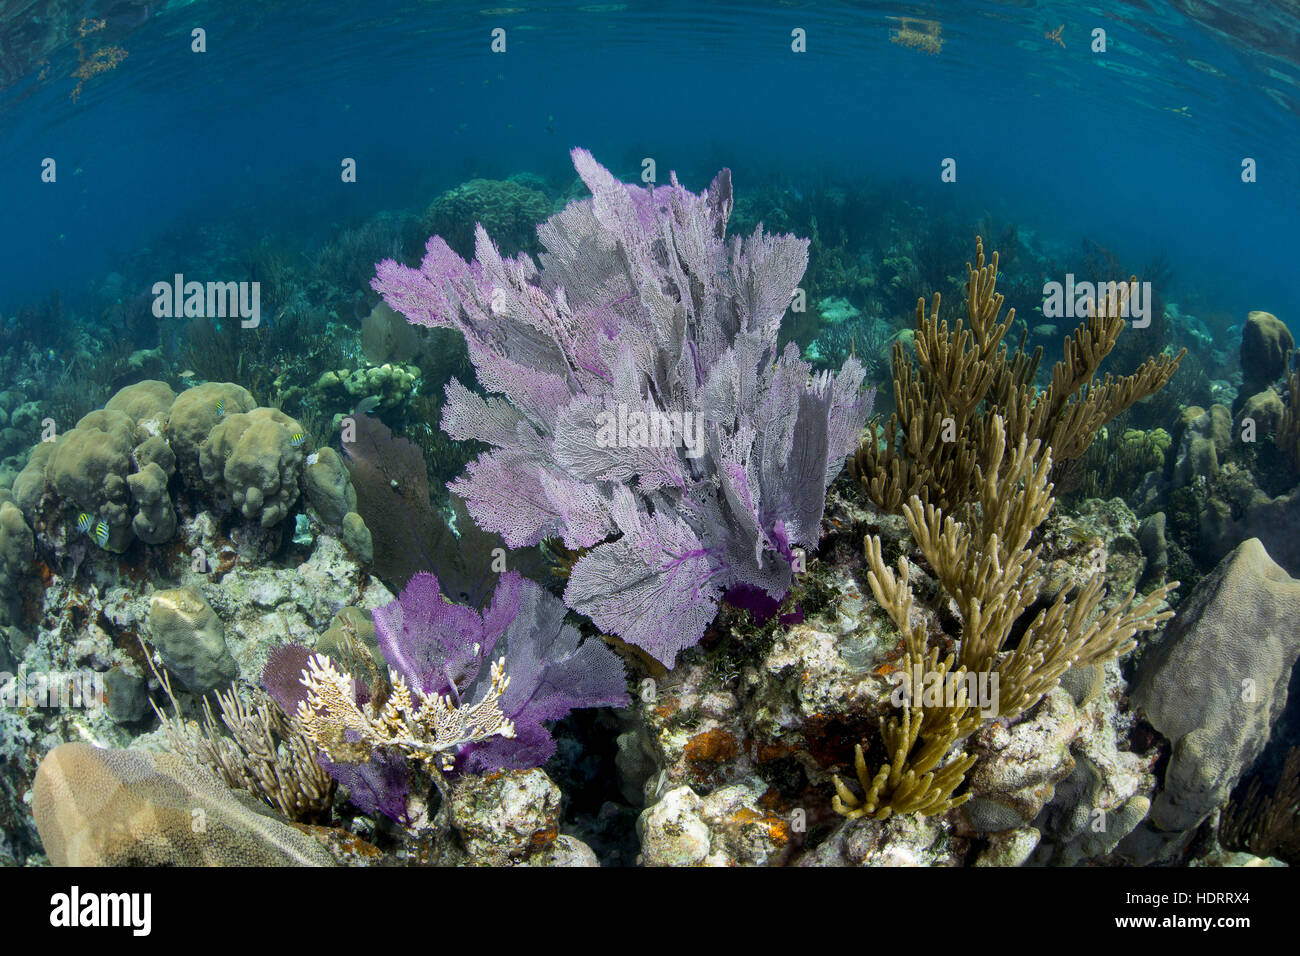 Dry Tortugas, August 2015, Purple fan coral and lots of healthy life in a shallow reef sceen near Ft. Jefferson in the Dry Tortugas Stock Photo